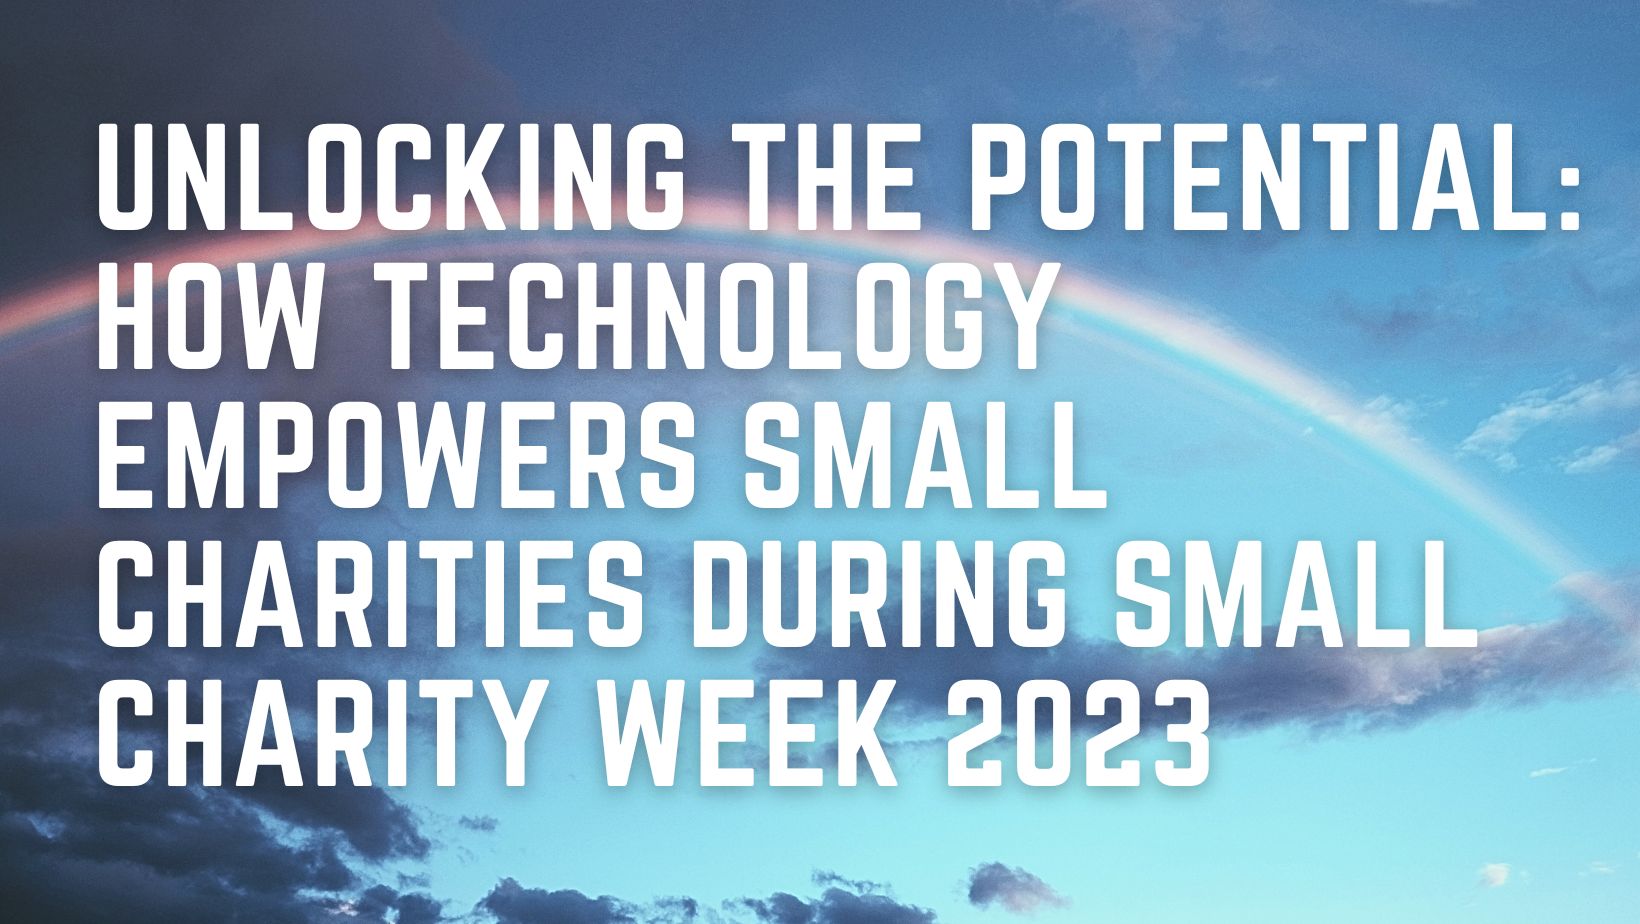 Unlocking the Potential: How Technology Empowers Small Charities during Small Charity Week 2023